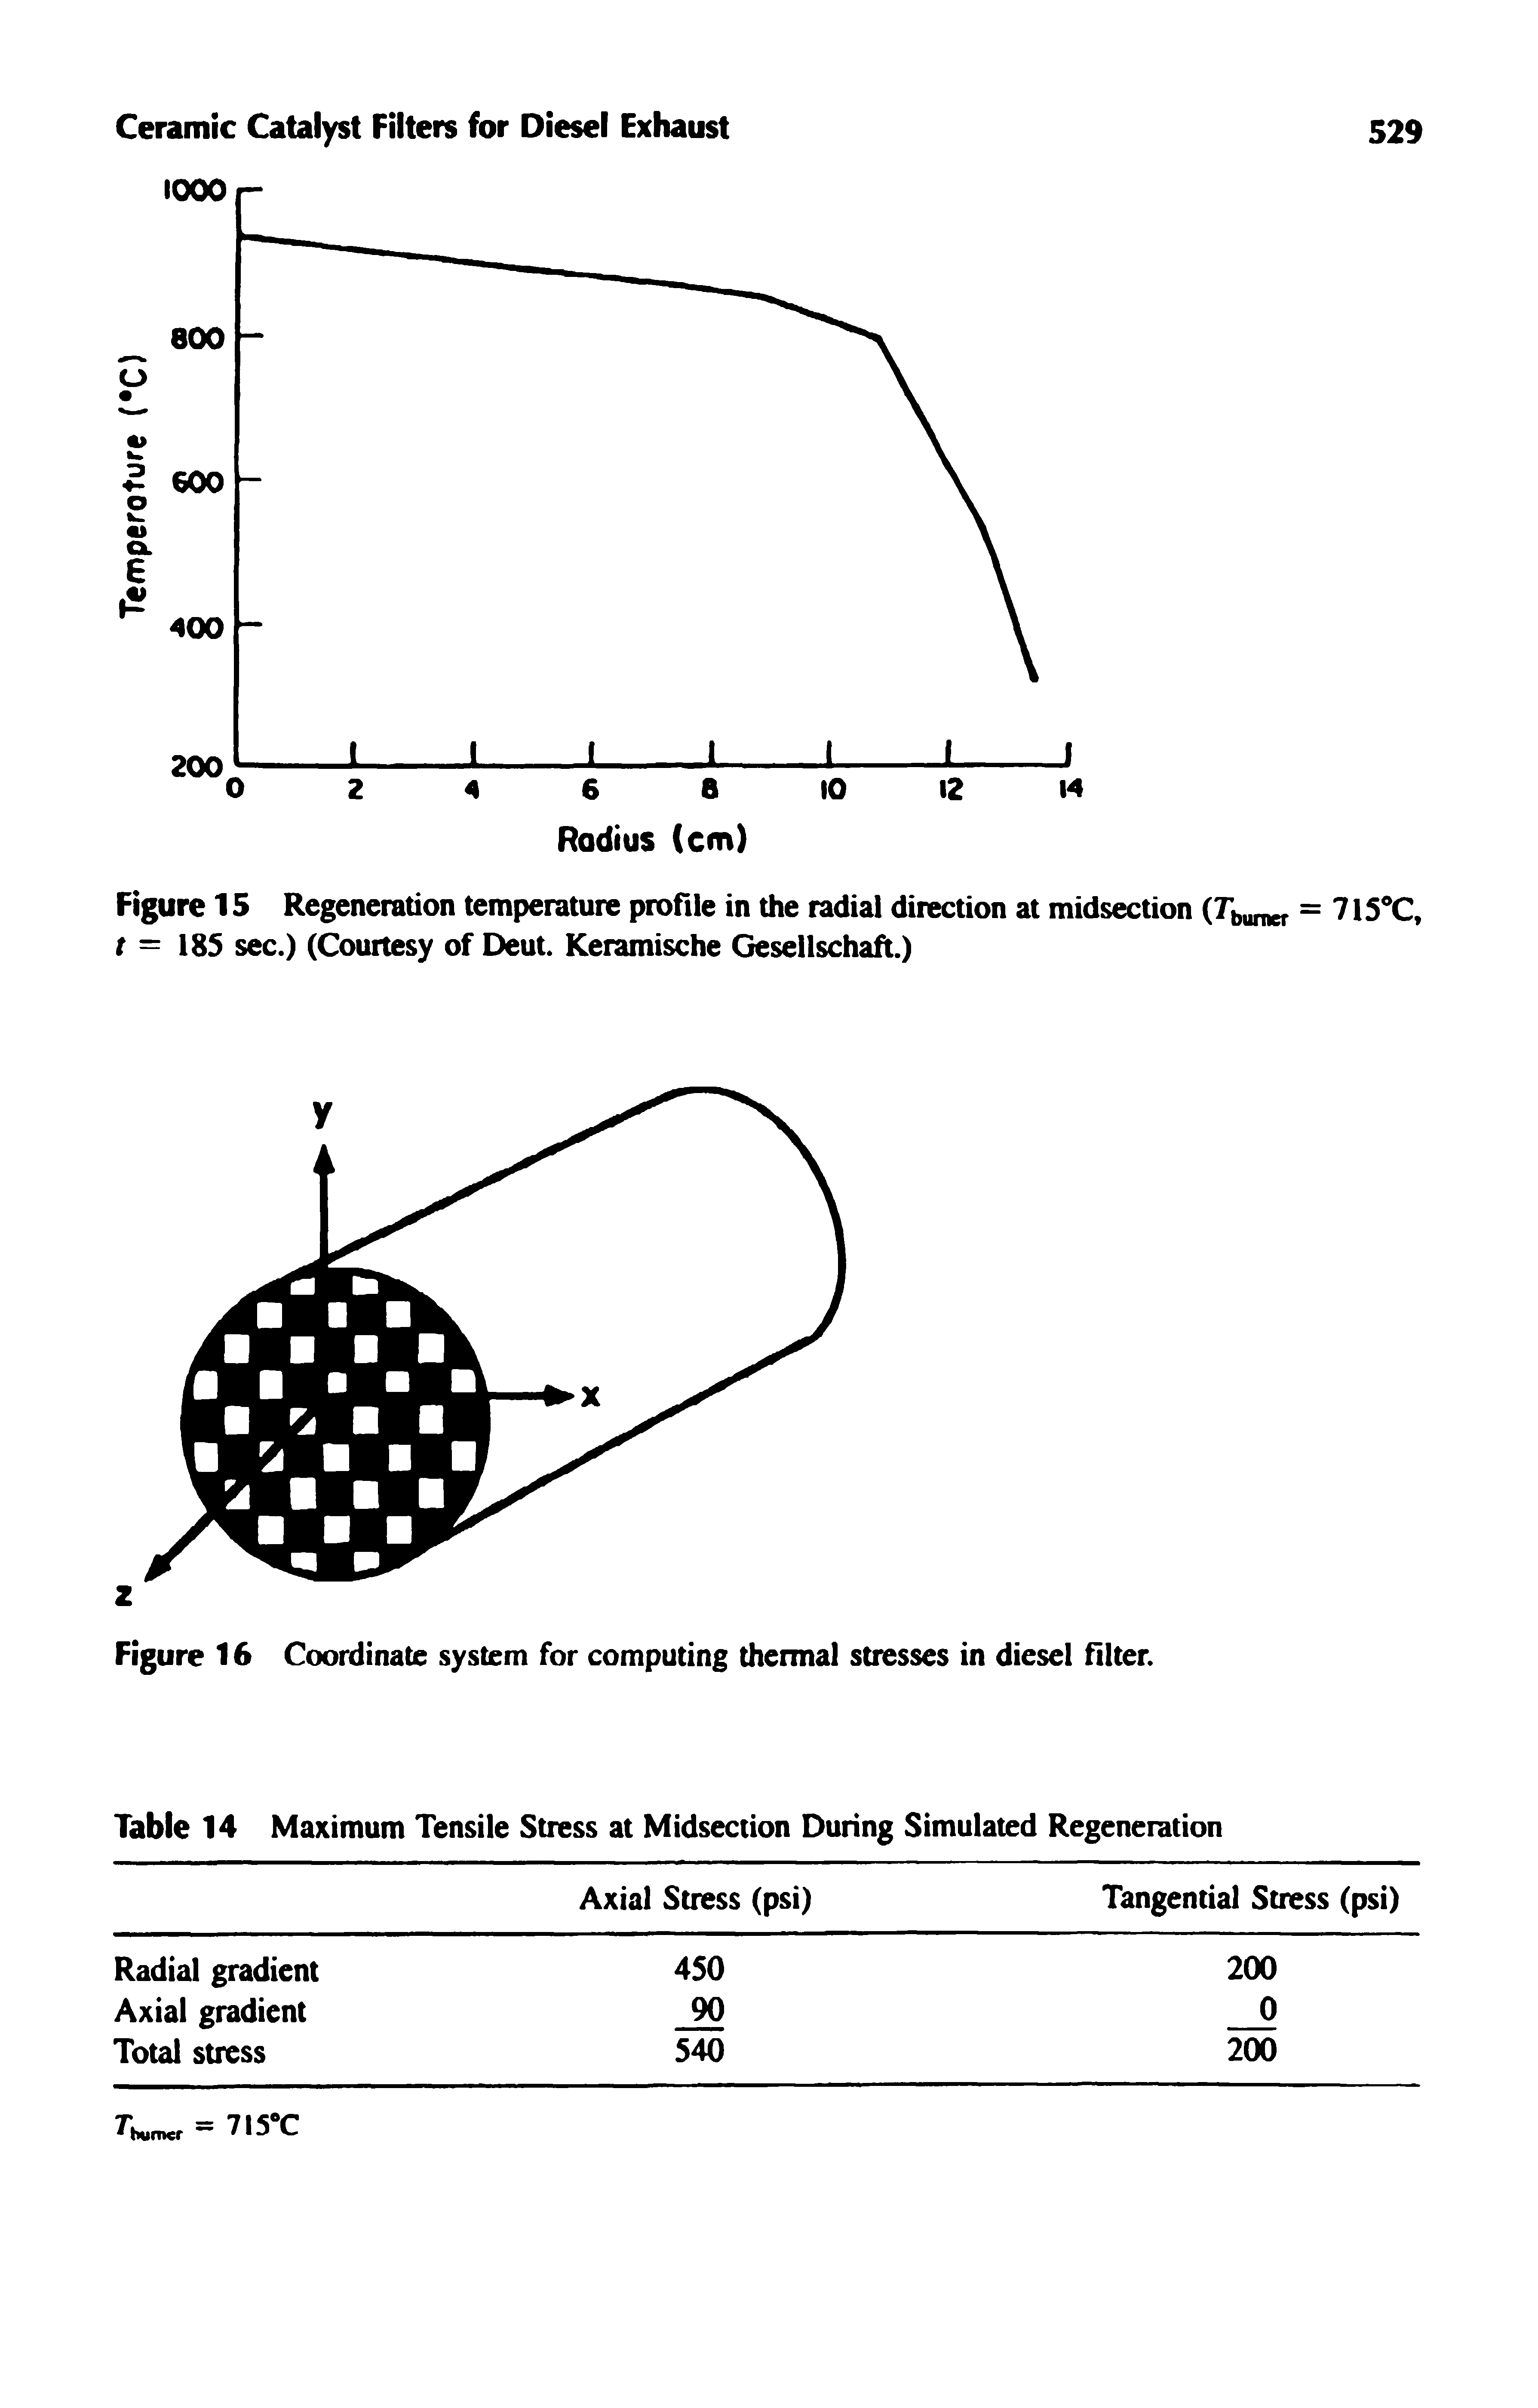 Figure 16 Coordinate system for computing thermal stresses in diesel filter.